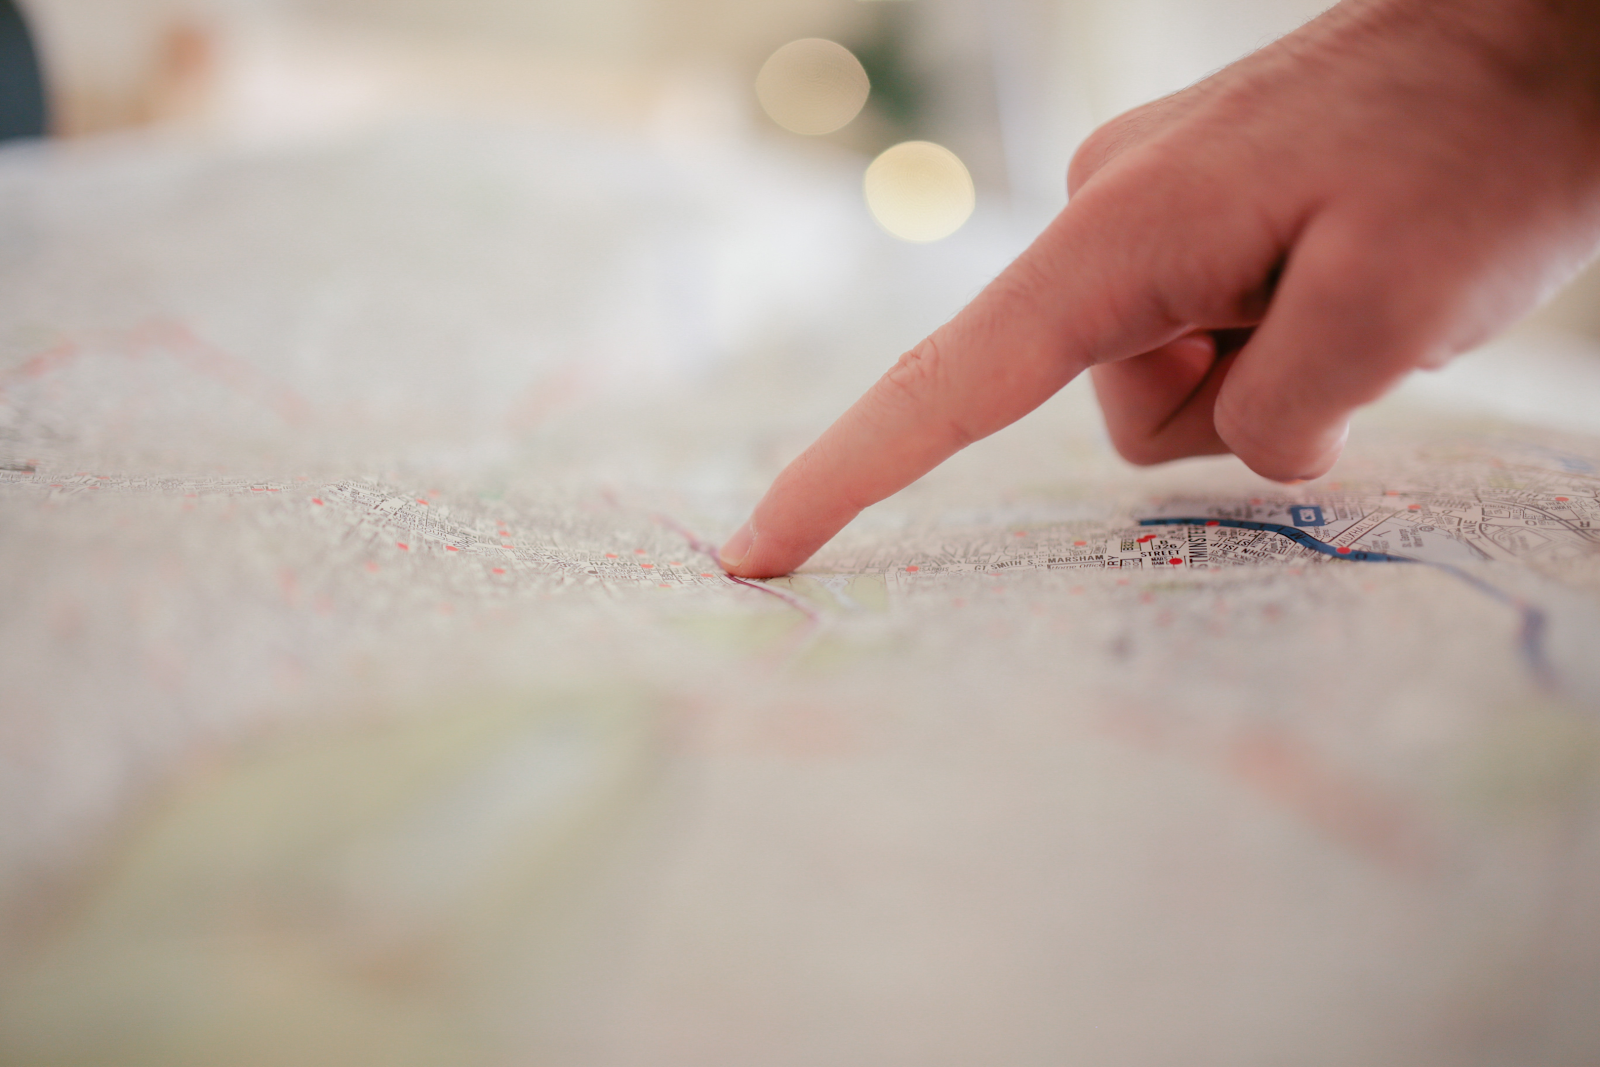 Finger touching a point on a map with a blurry background and foreground.